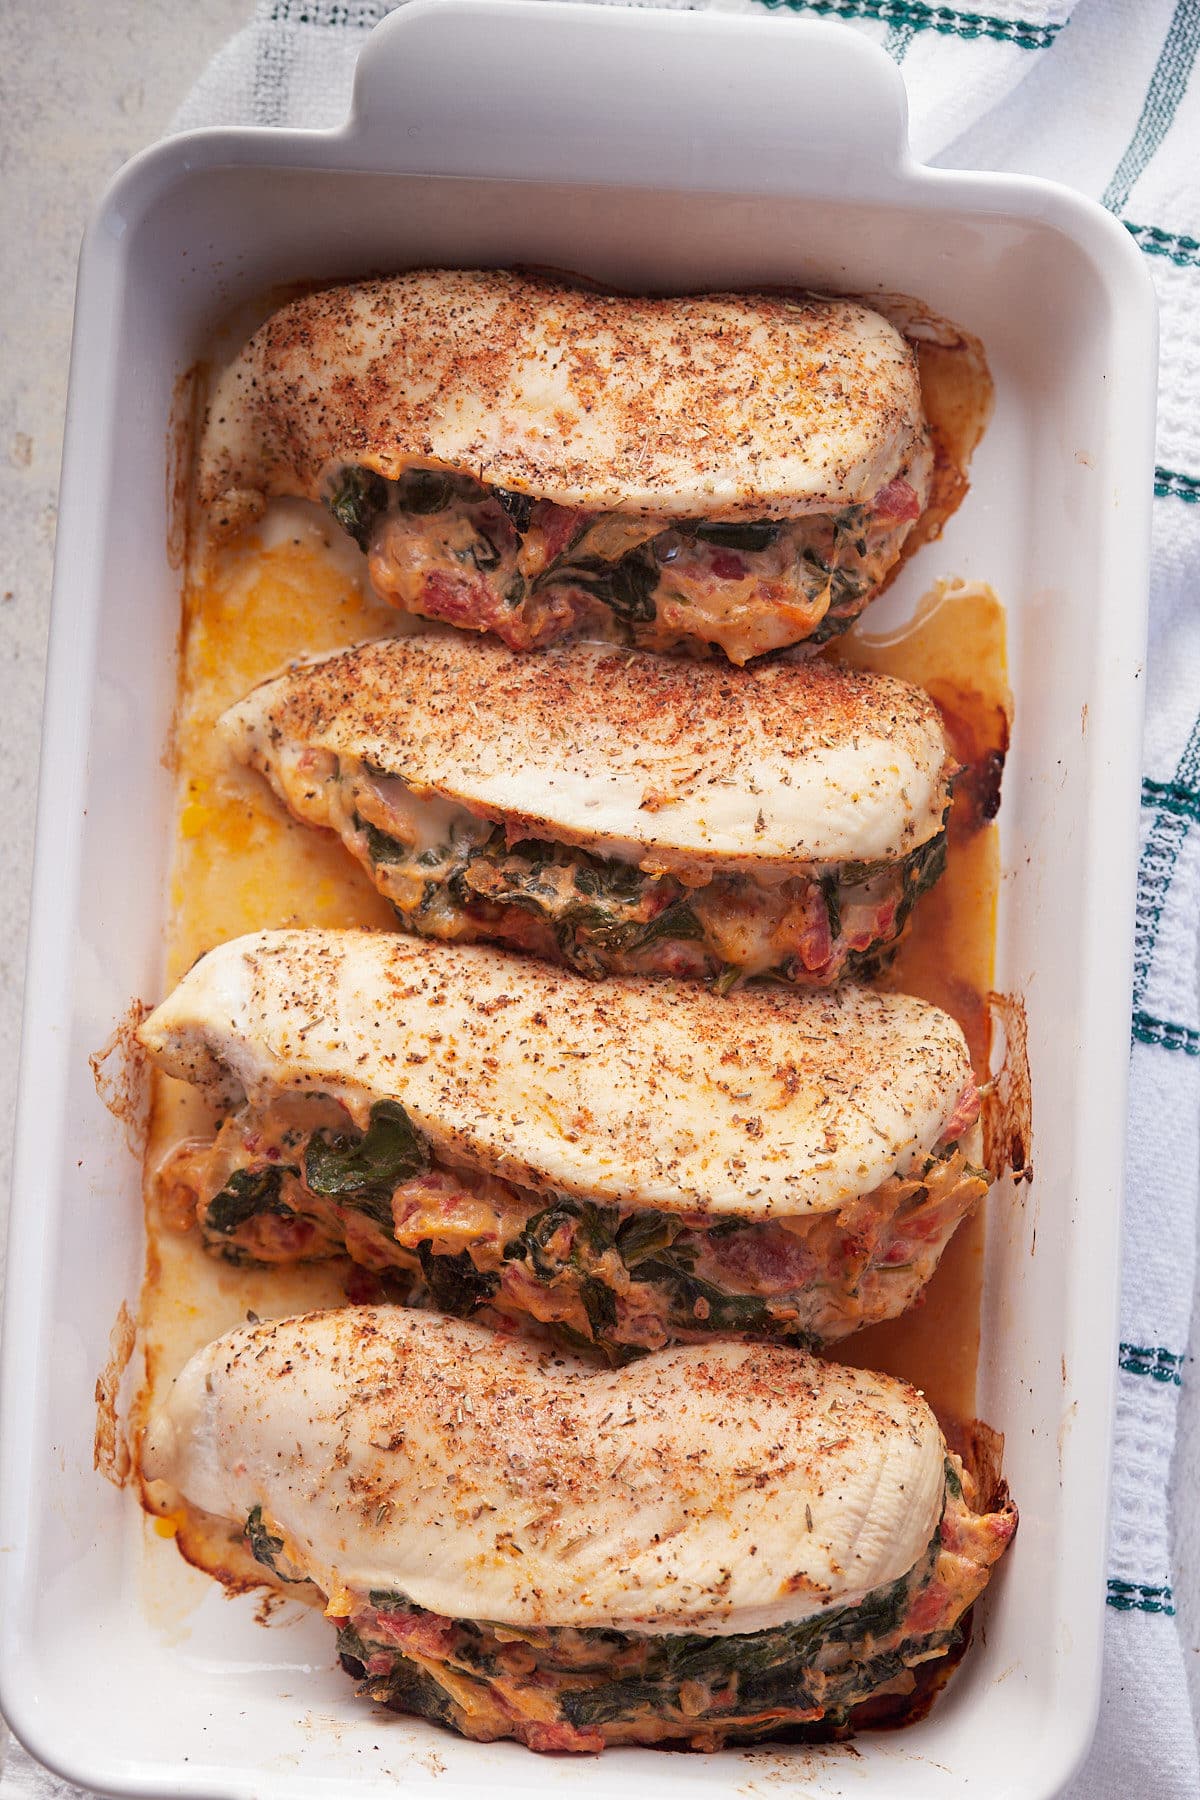 Four baked spinach stuffed chicken breasts in a white baking dish.